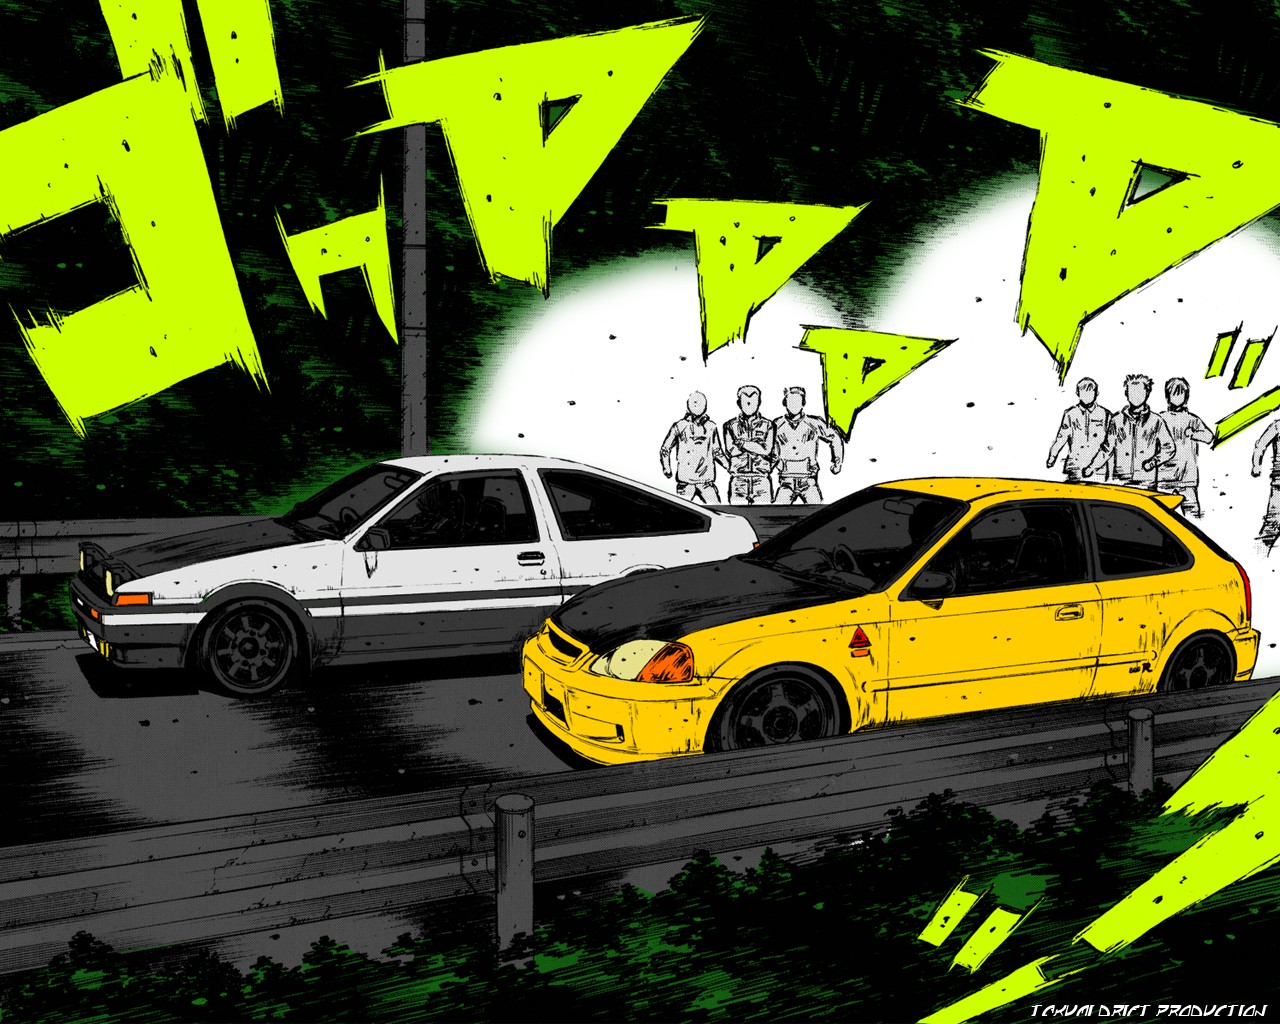 Console Writeline Initial D Anime Linux Style In The World